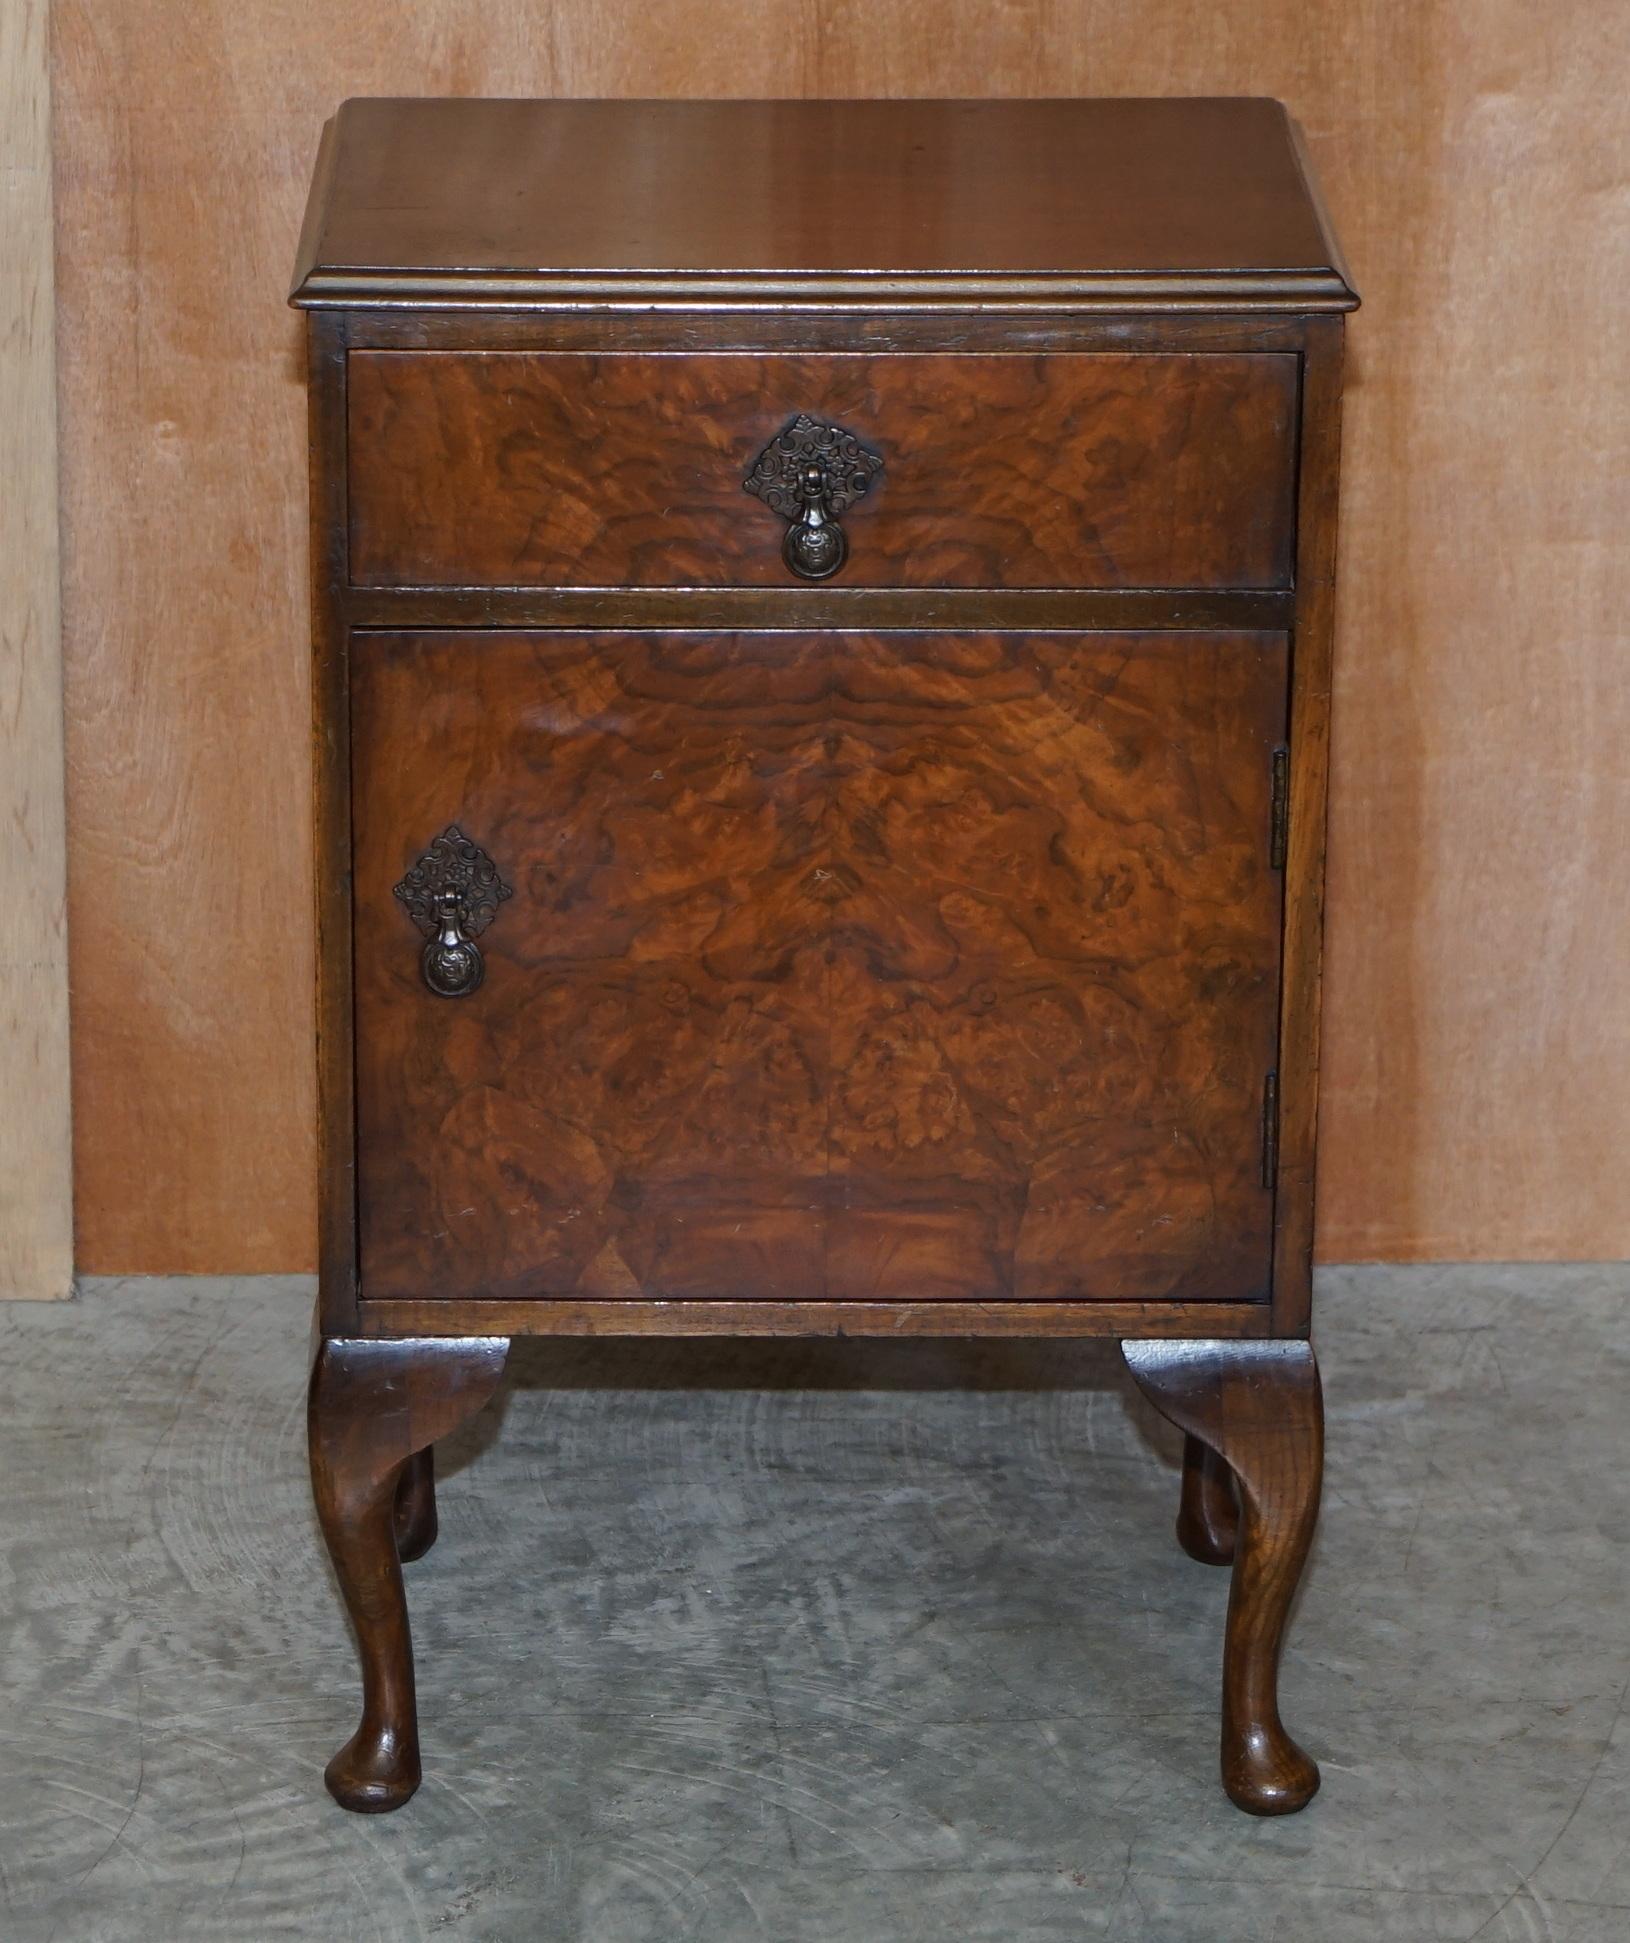 We are is delighted to offer for sale this lovely circa 1930’s Burr Walnut Maple & Co bedside or side lamp table which is part of a large suite

I have in total the dressing table with trifold mirrors, the very large double wardrobe, smaller